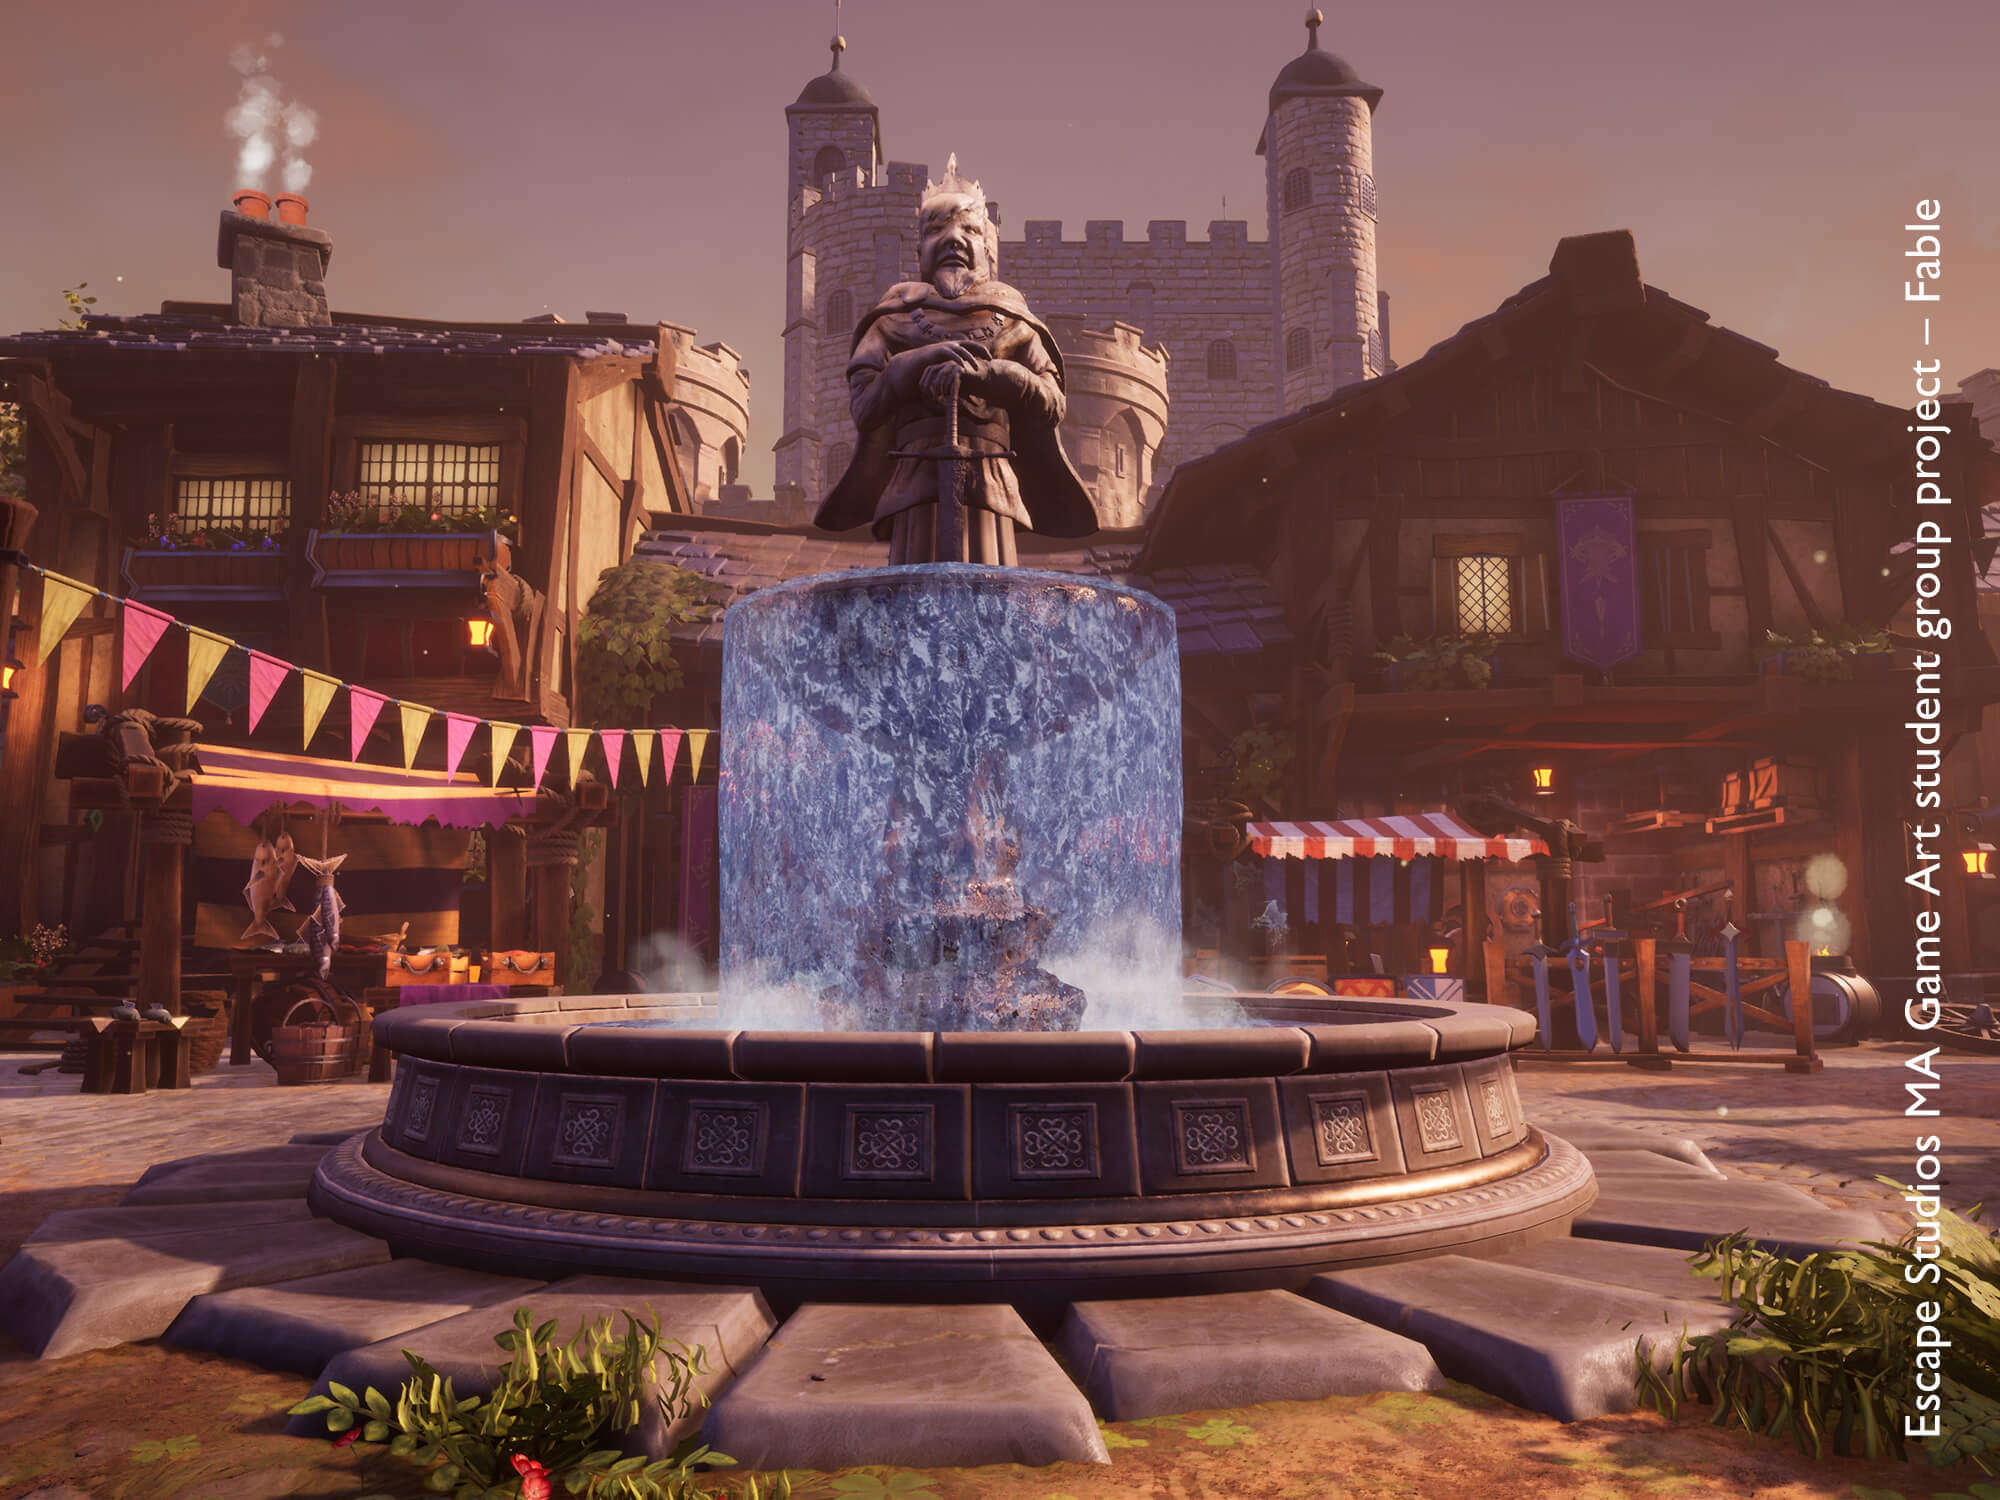 View of a video game scene of a fountain in the town square